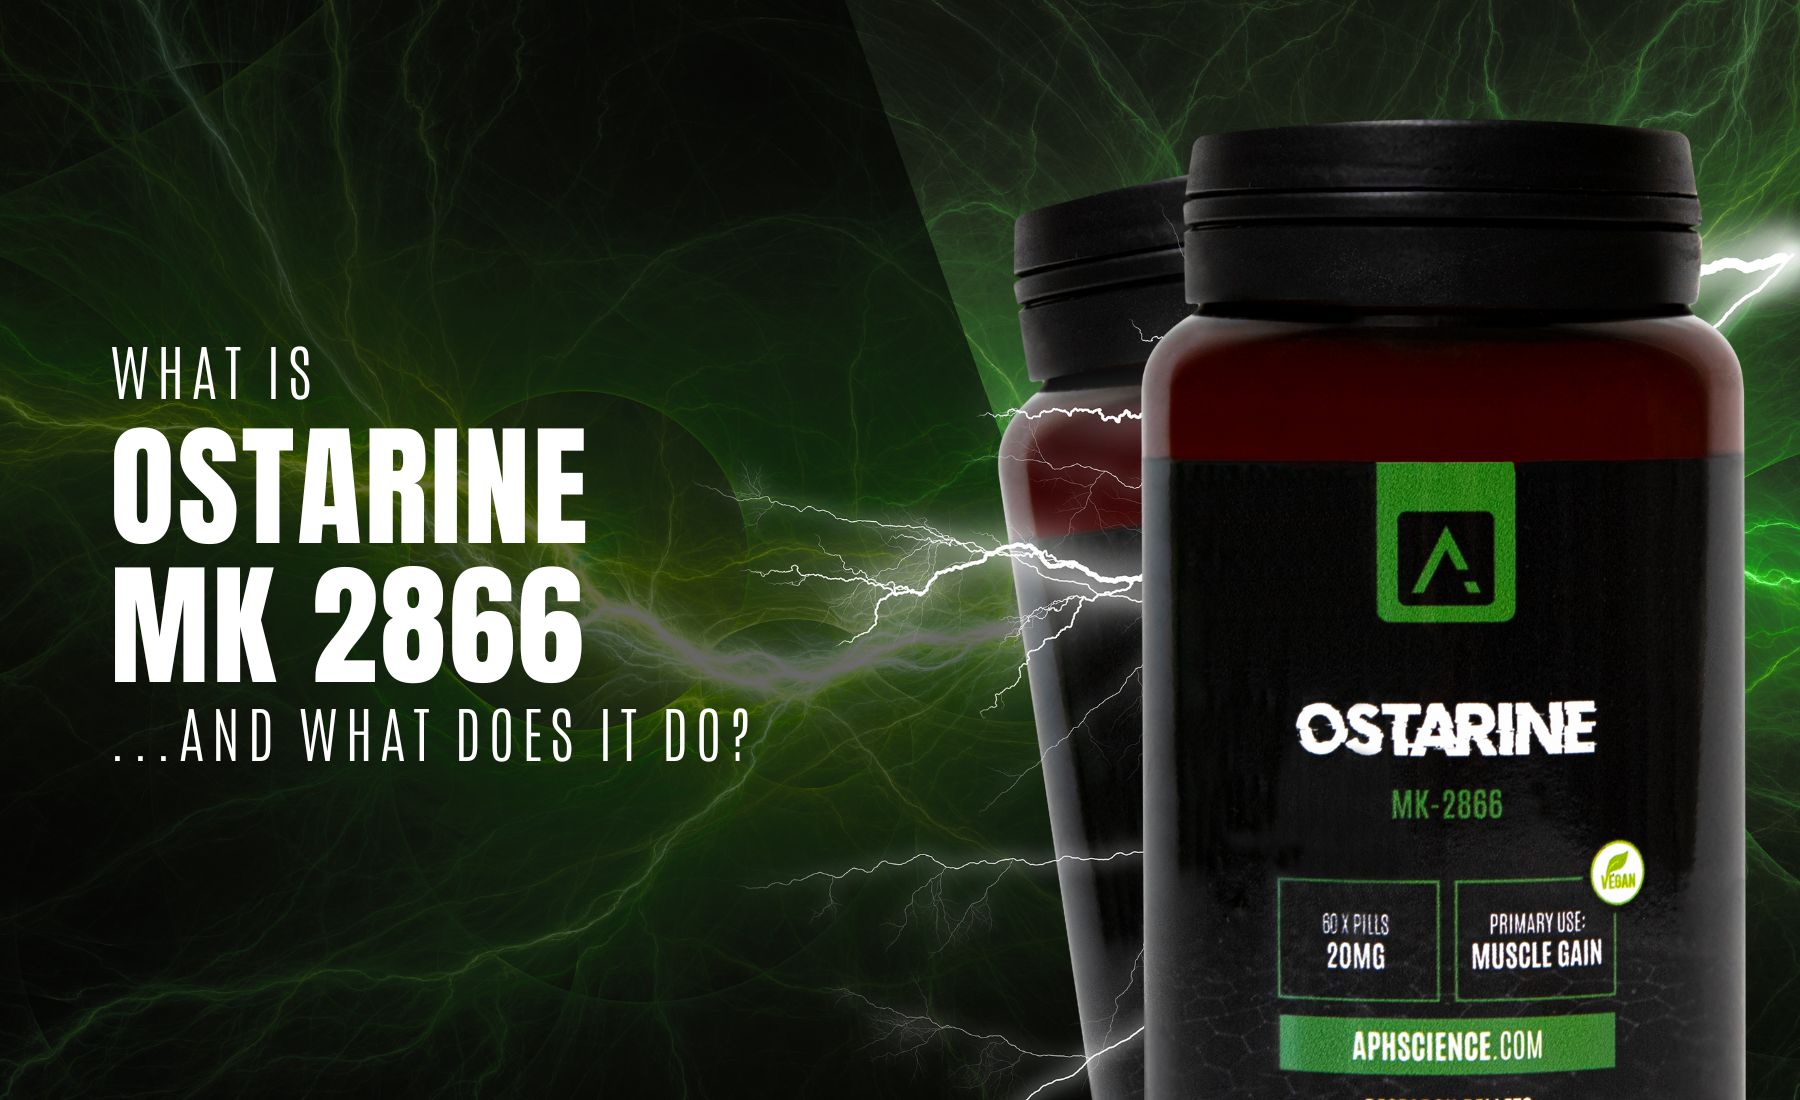 What Is Ostarine and What Does It Do?